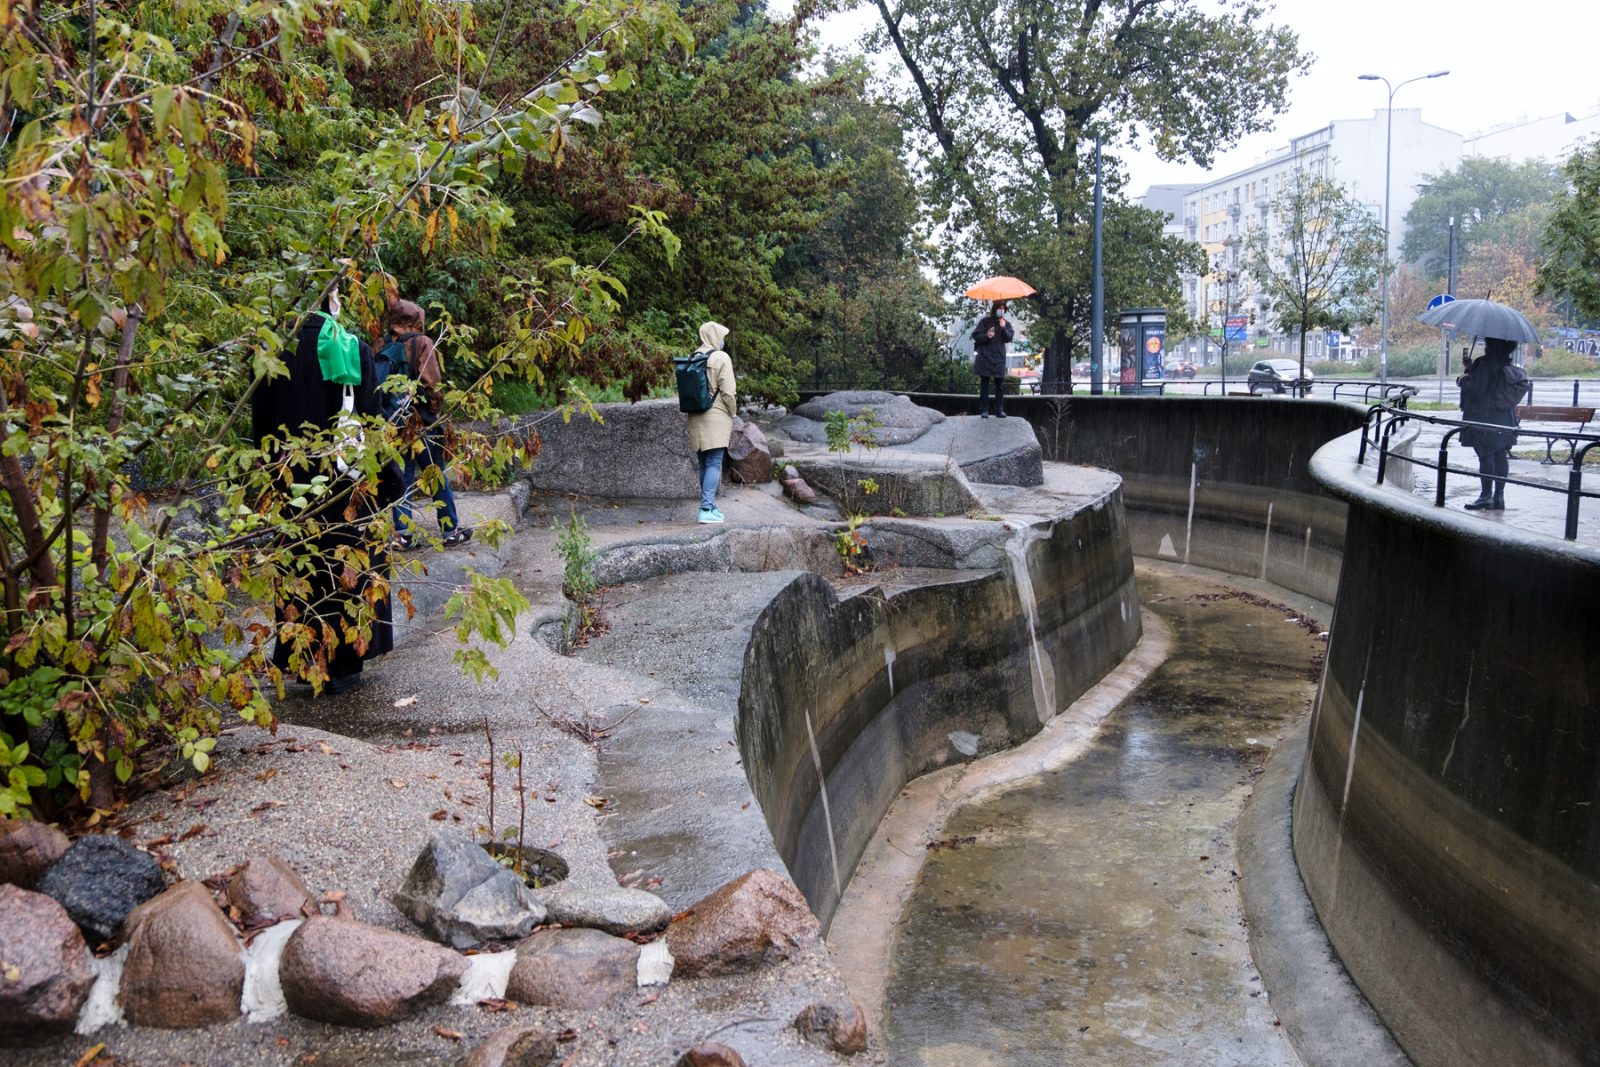 Mammalproof, 13.10.2020, Municipal Zoological Garden in Warsaw, an attempt to look at urban planning from the perspective of human-animal relations. Photo Michał Matejko, 2020